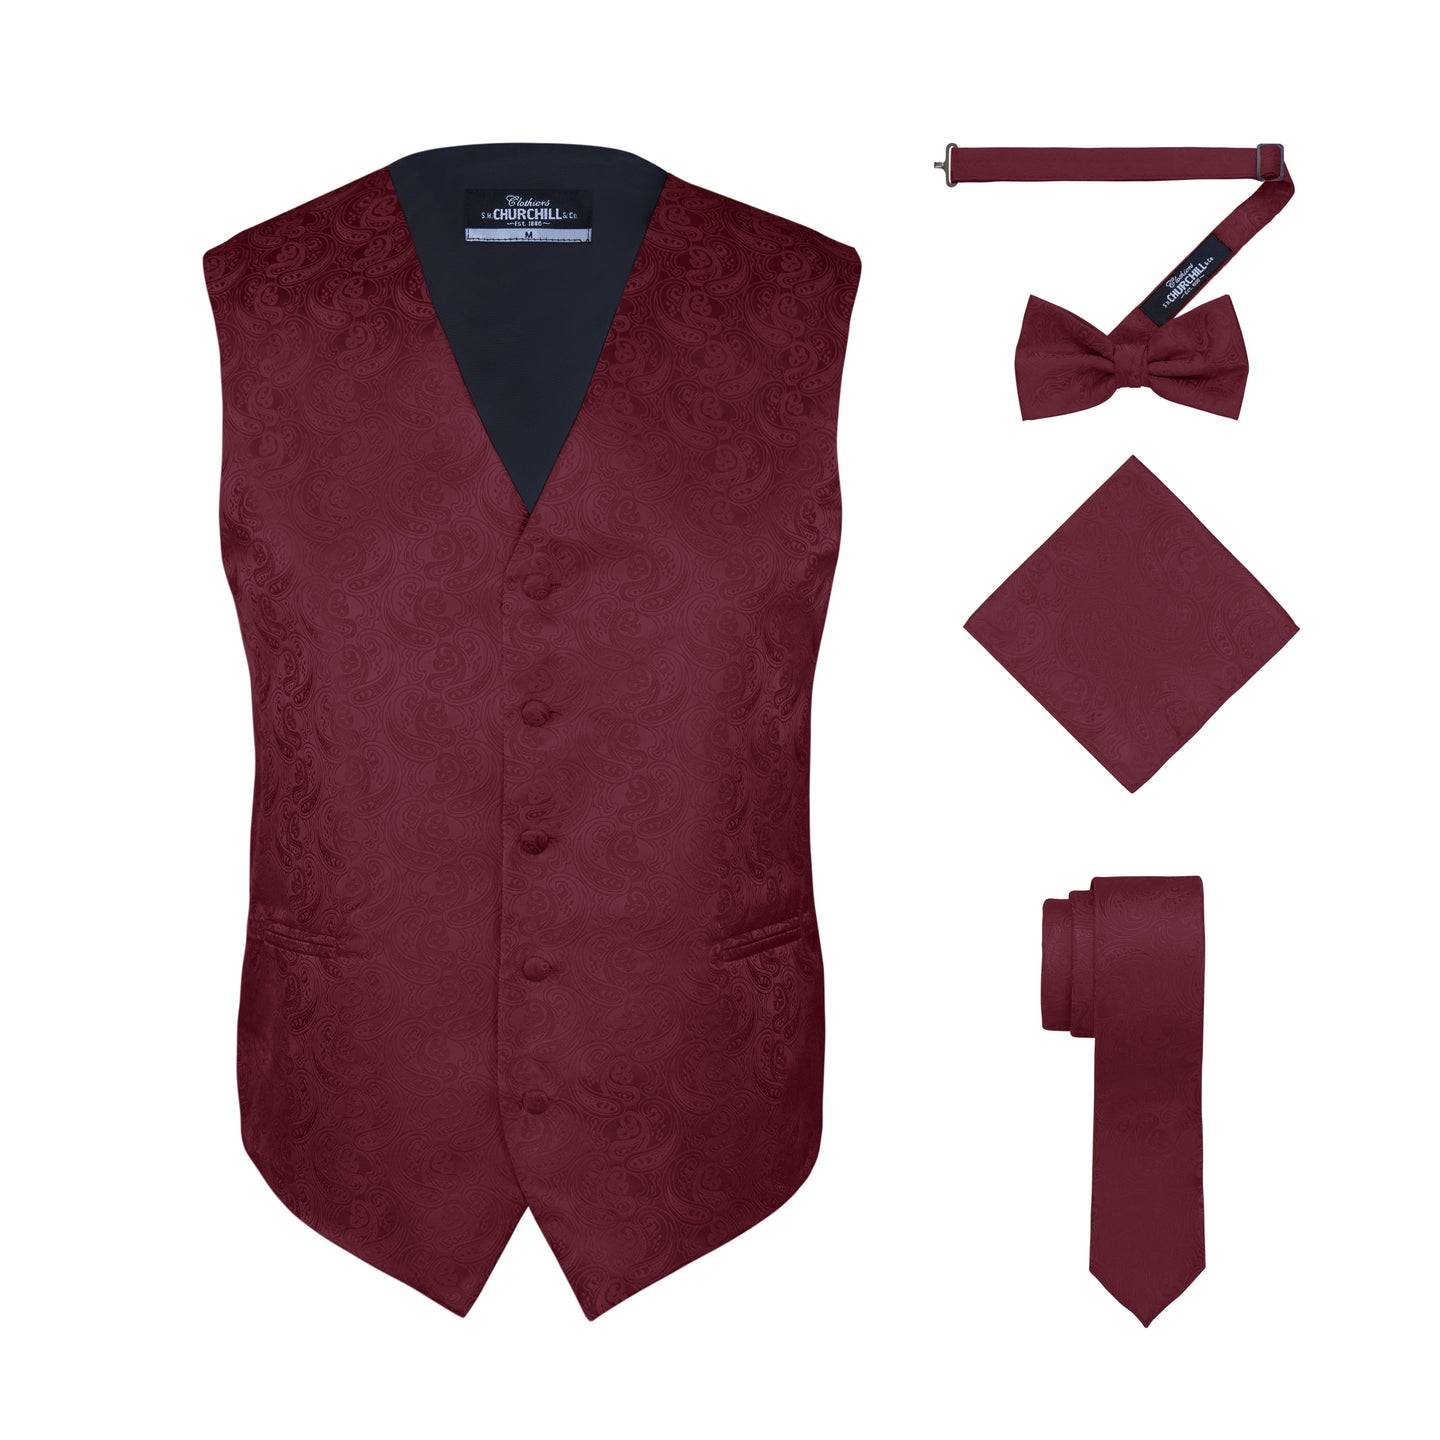 S.H. Churchill & Co. Men's Burgundy Paisley Vest Set, with Bow Tie, Neck Tie and Pocket Hanky